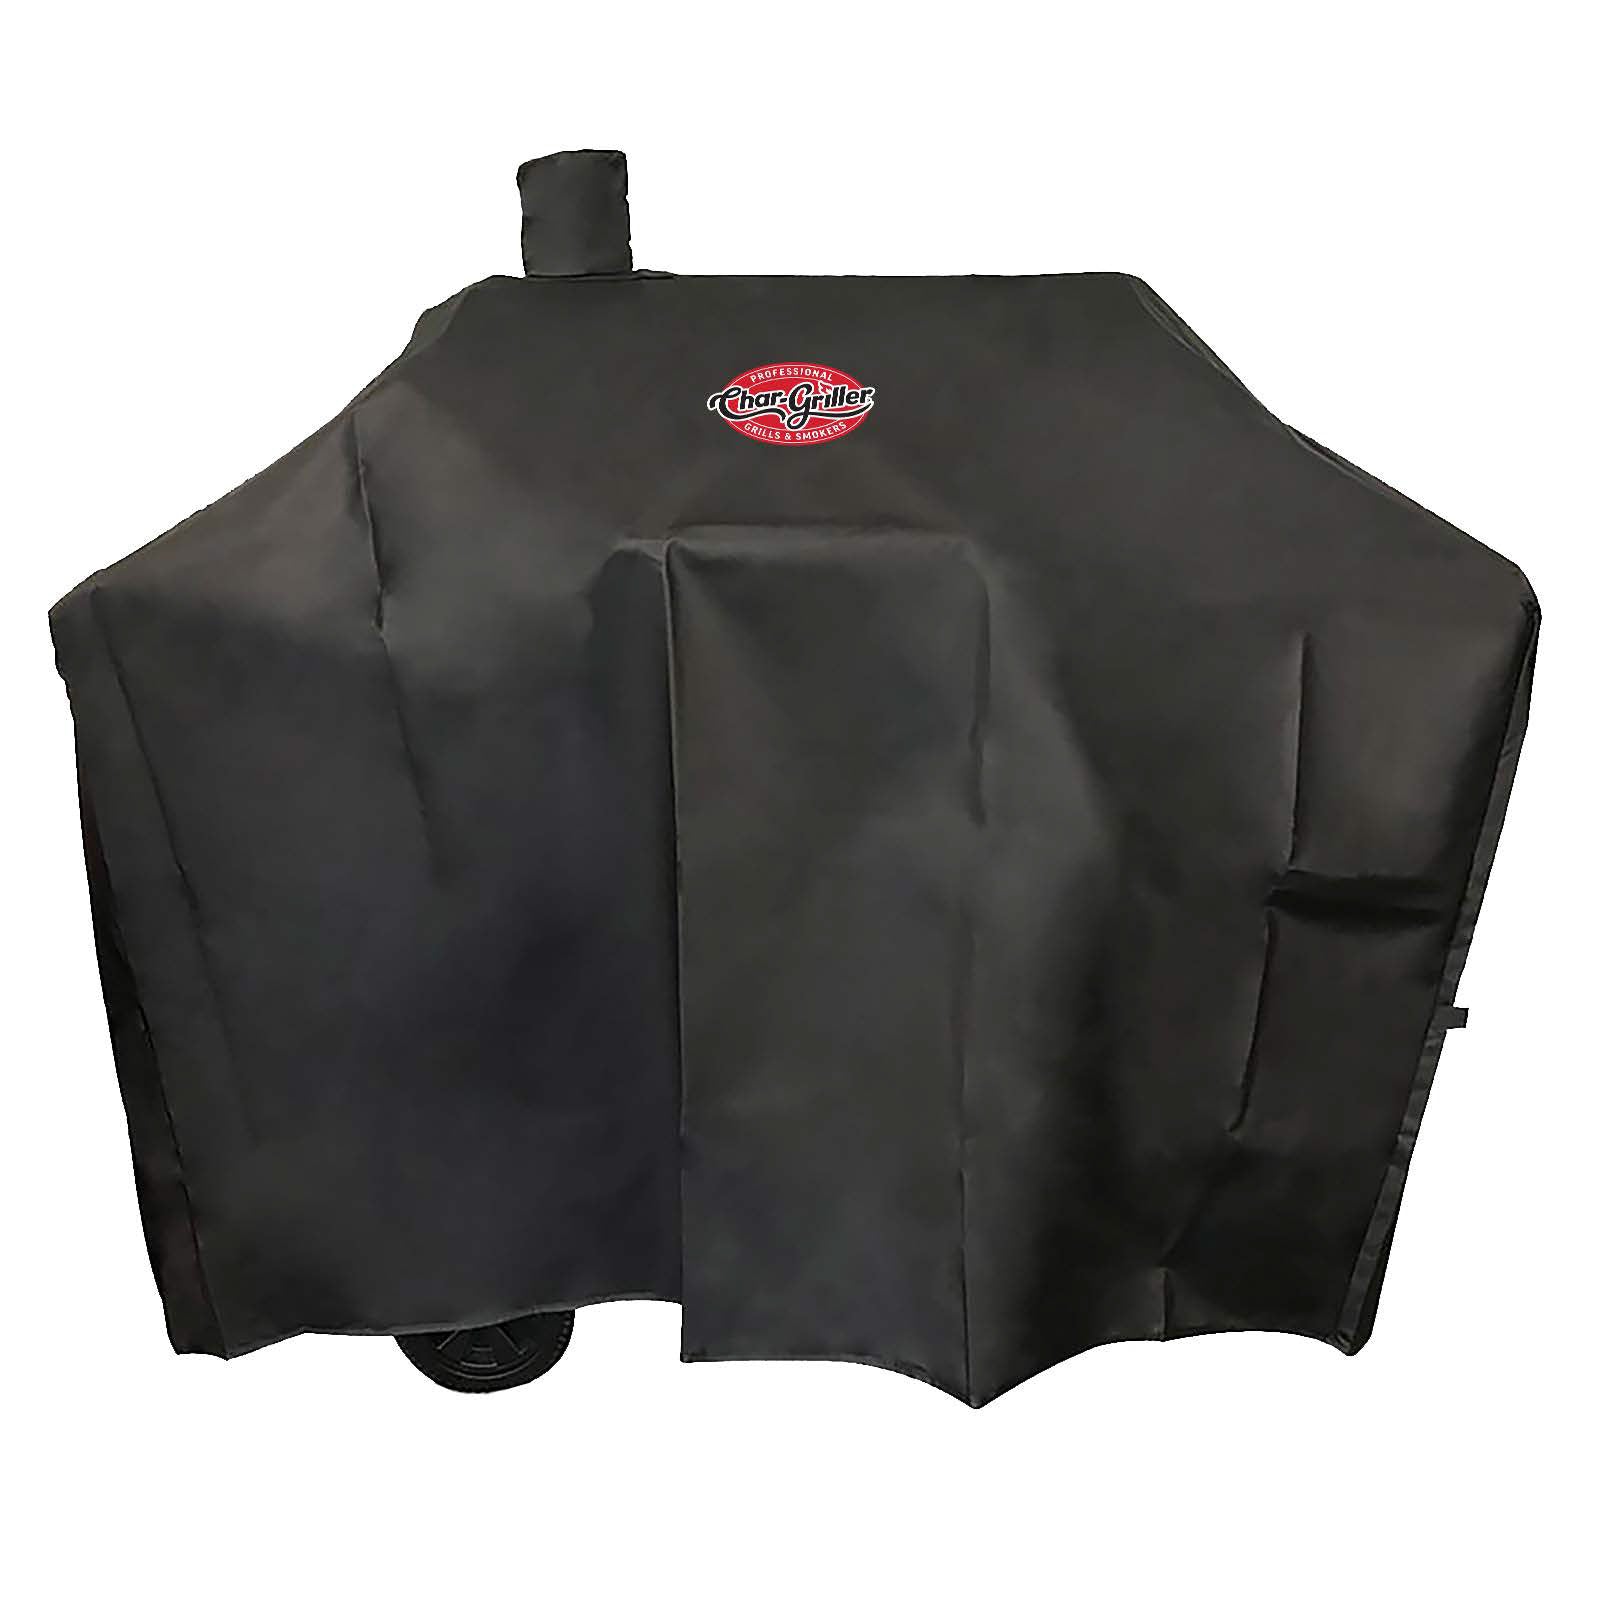 Traditional Charcoal Grill Cover - Char-Griller